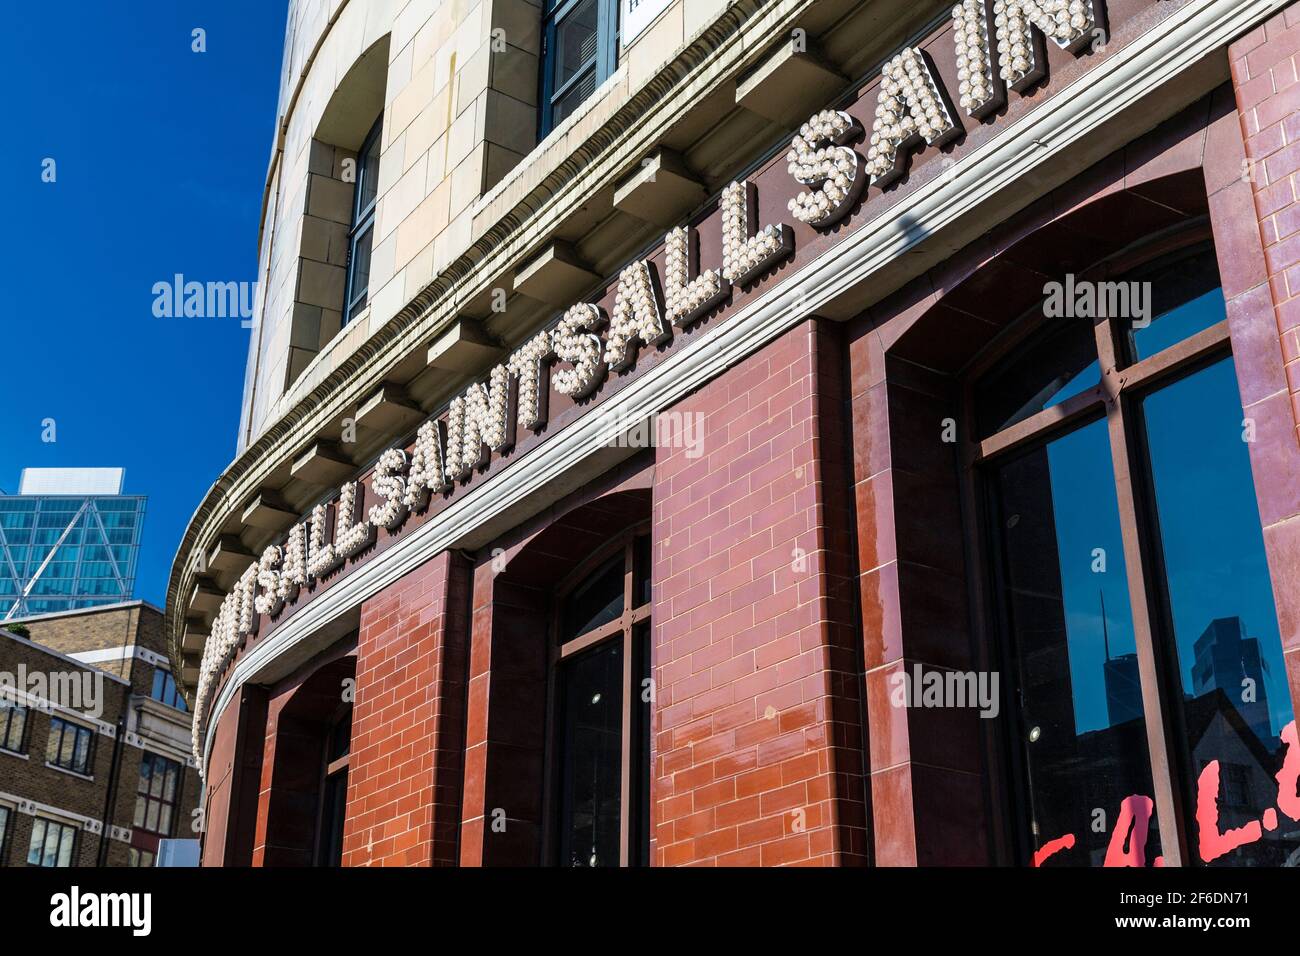 Shop exterior of AllSaints clothing brand with a lightbulb sign in Shoreditch, London, UK Stock Photo